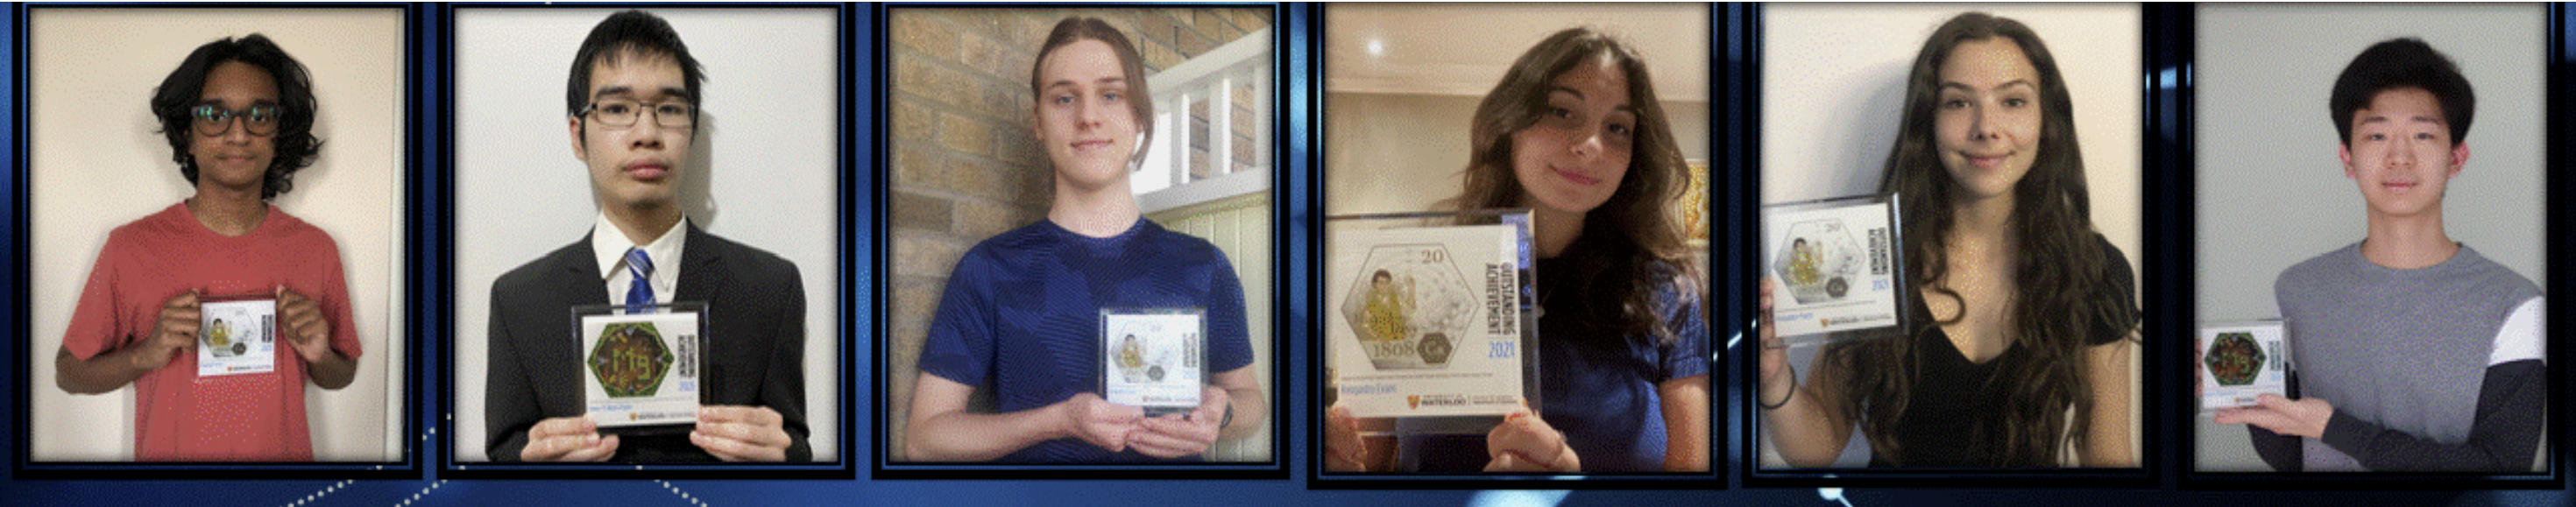 Pictures of students who received award from the University of Waterloo science contests.